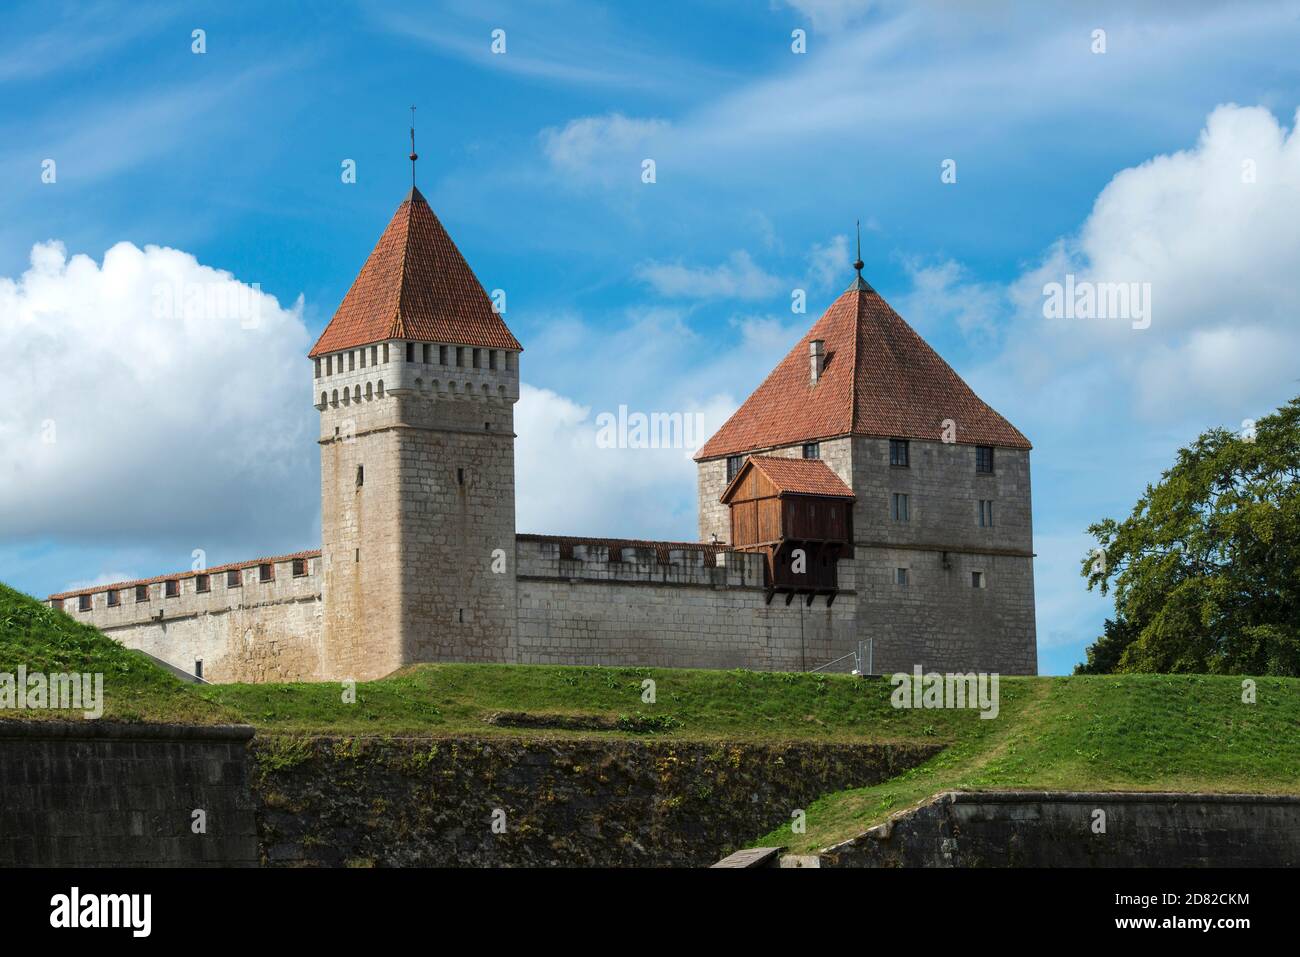 ESTONIA, SAAREMAA,  Castle of Kuressaare, the only gothic fortress in the Baltics, was a stronghold of the Teutonic Knights in the 14.centu Stock Photo